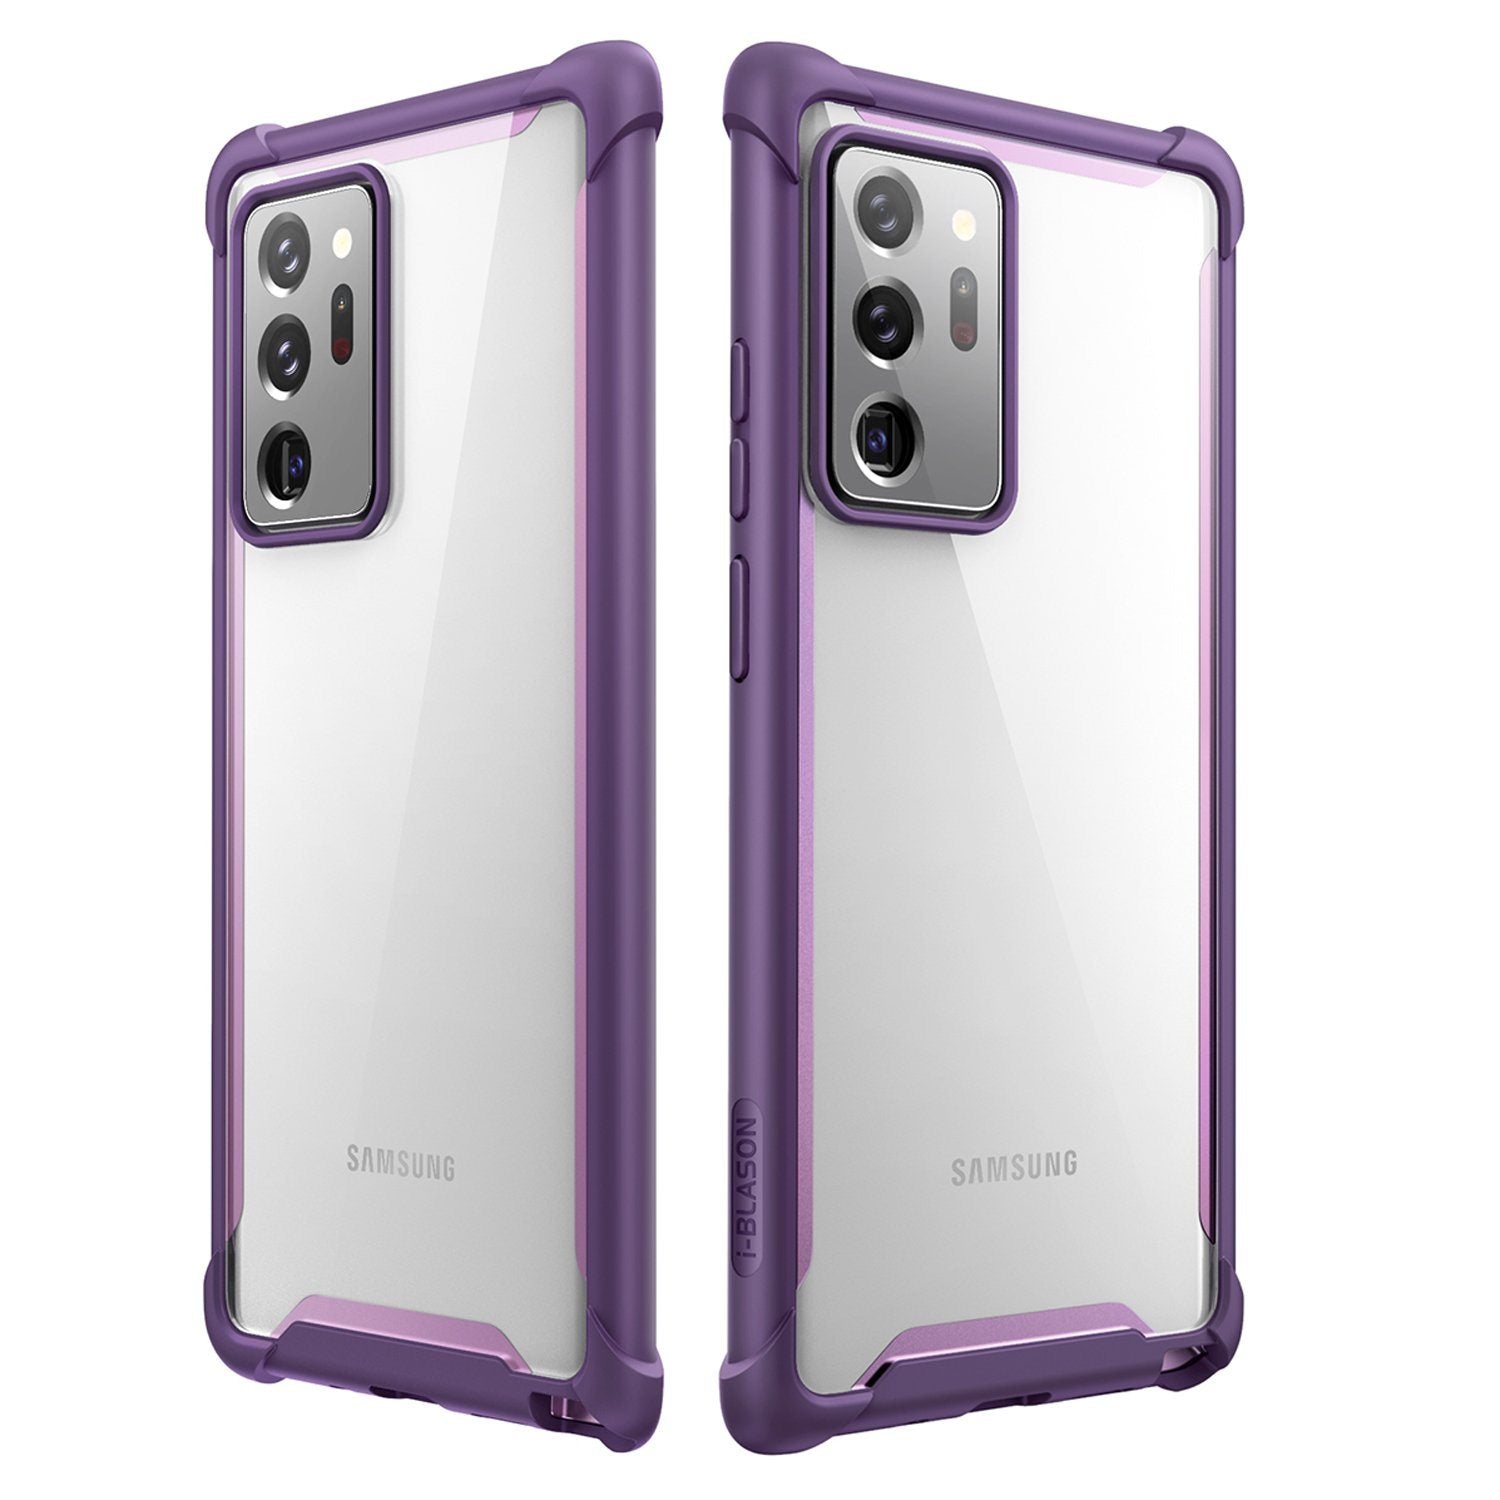 i-Blason Ares Series Clear Case for Samsung Galaxy Note 20 Ultra(Without Screen Protector), Purple Default i-Blason 